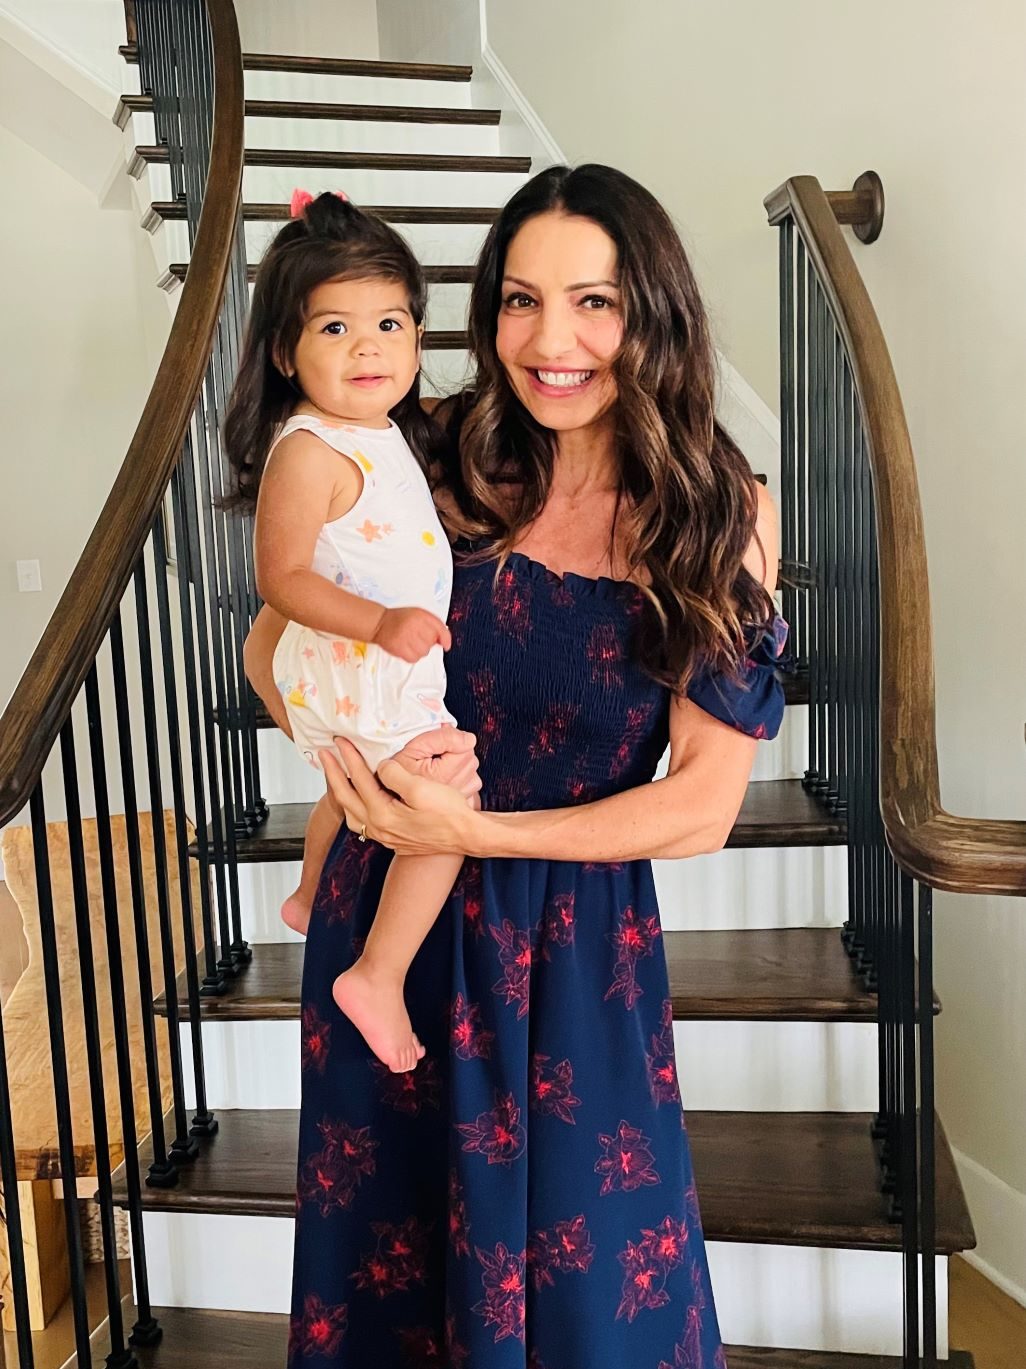 smiling woman in navy blue dress holding toddler girl in front of staircase